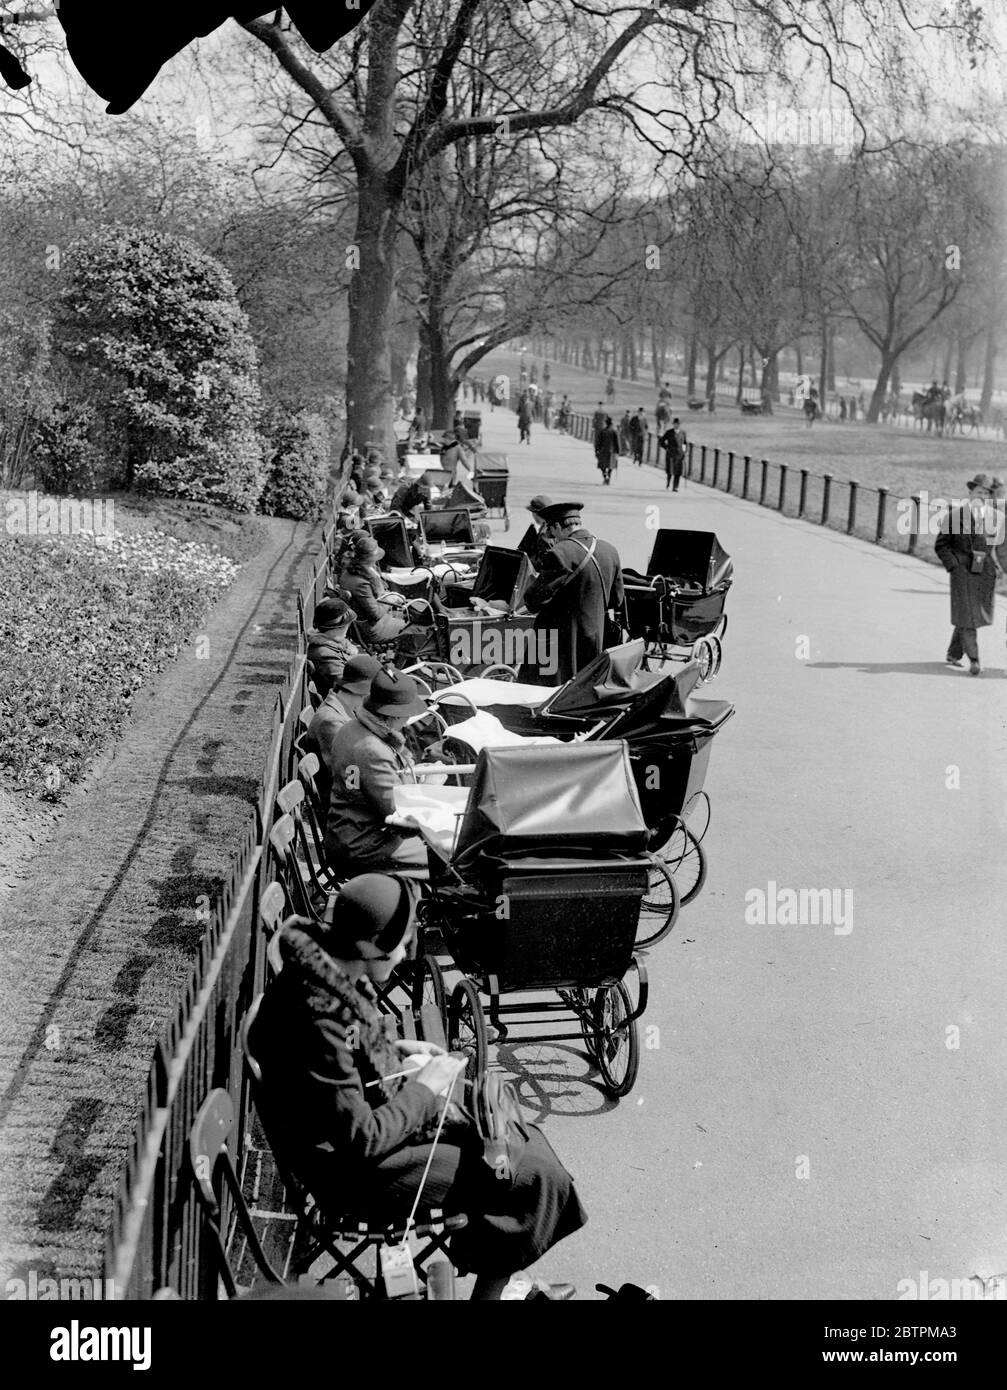 Spring retuns to London . Spring has again come to London after days of cold weather , and Londoners soon flocked to the parks and open spaces to take advantage of the warm sunshine . Photo shows , Perambulators ' parked by the Row in Hyde Park . 18 April 1936 Stock Photo